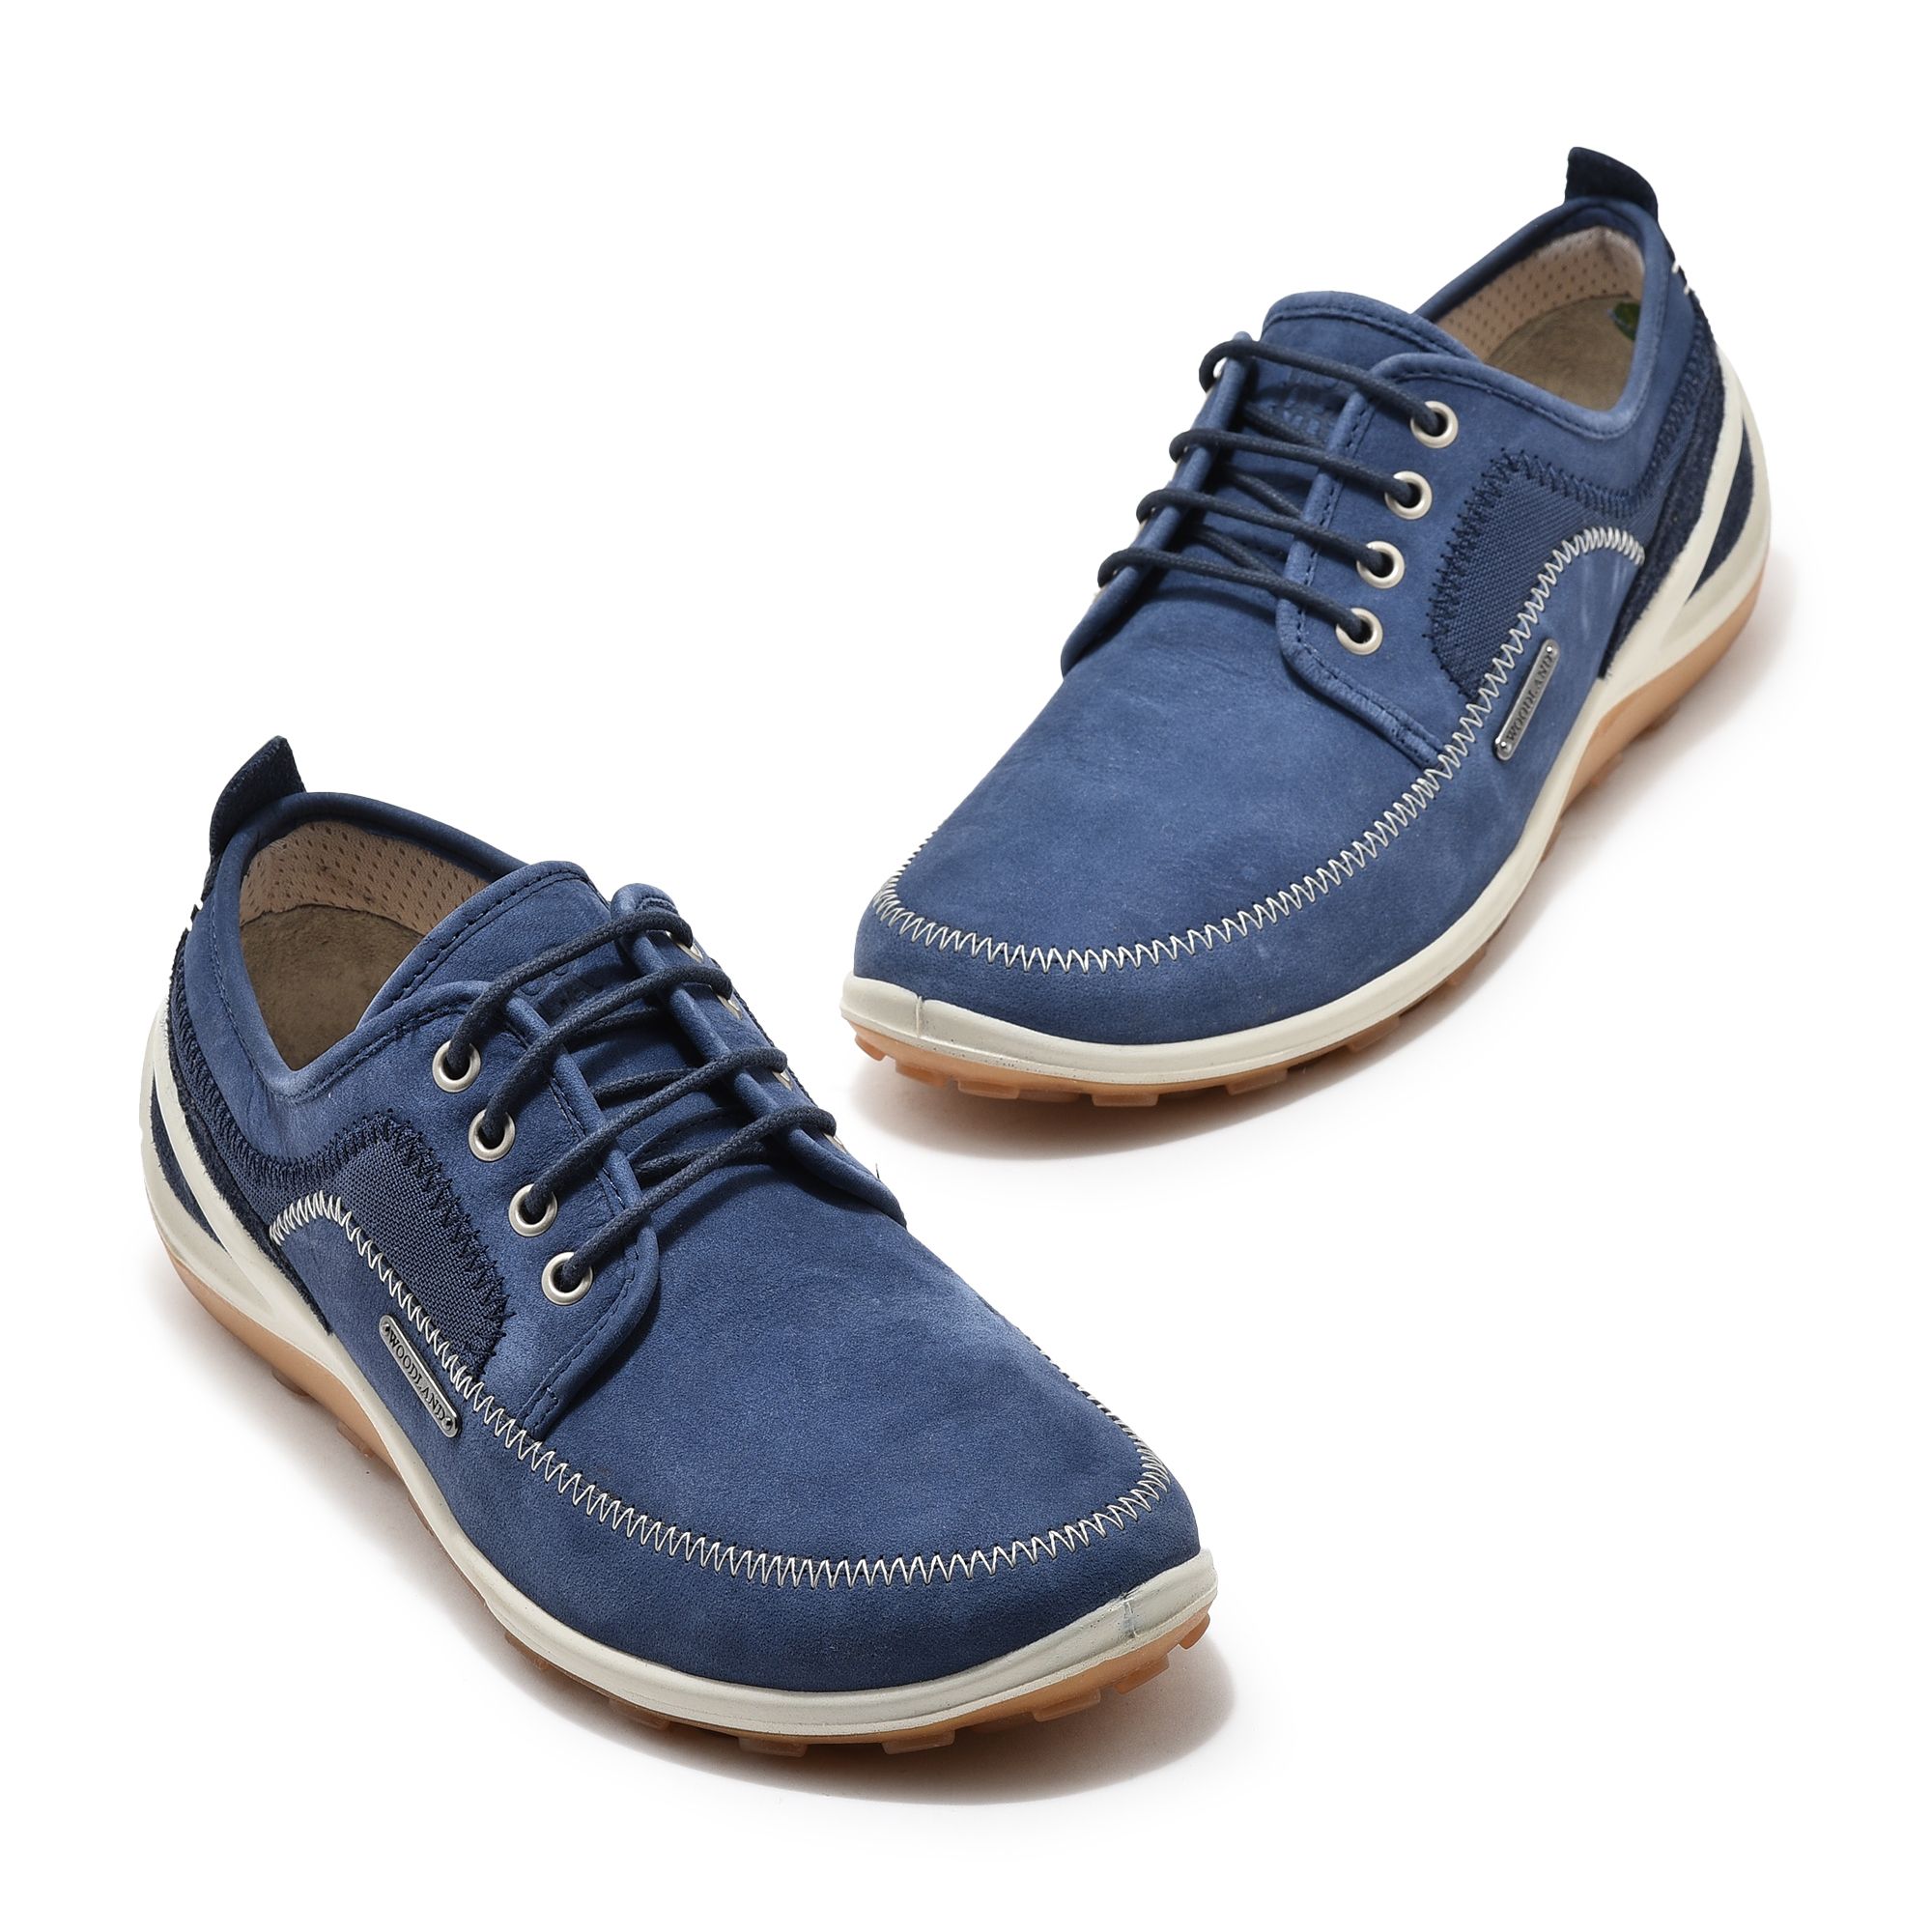 Woodland Blue Casual Shoes For Men